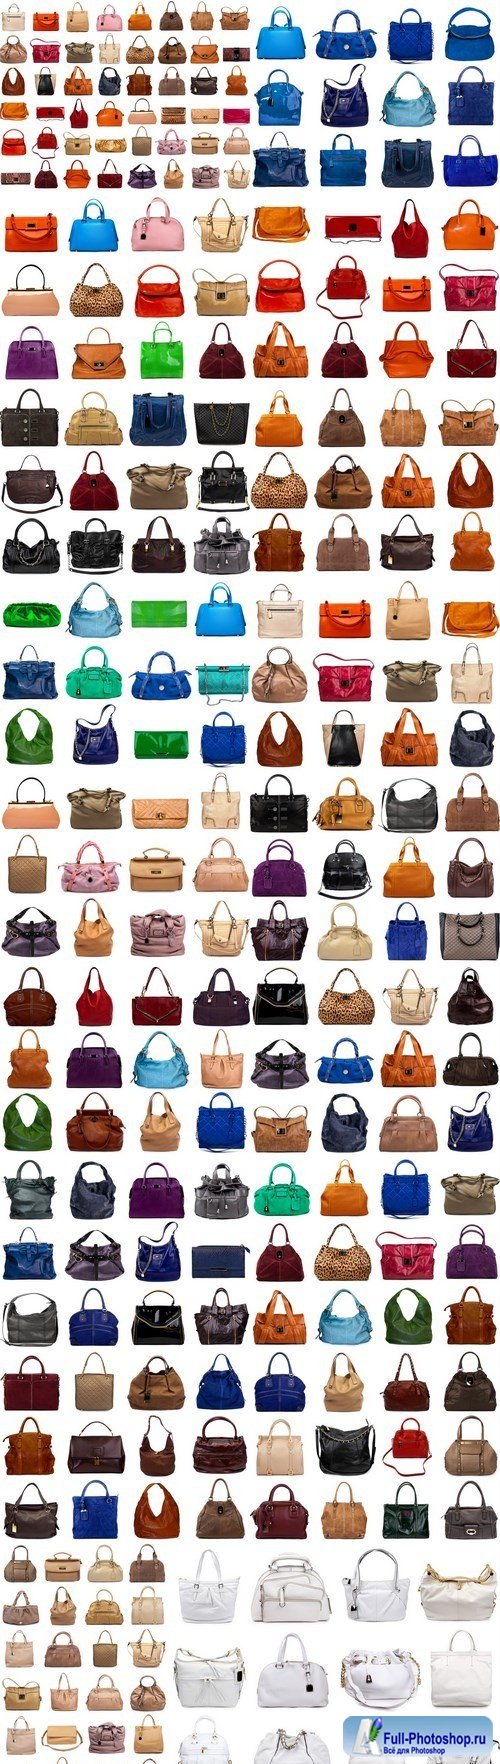 Collection of multicolored female bags - 19xUHQ JPEG